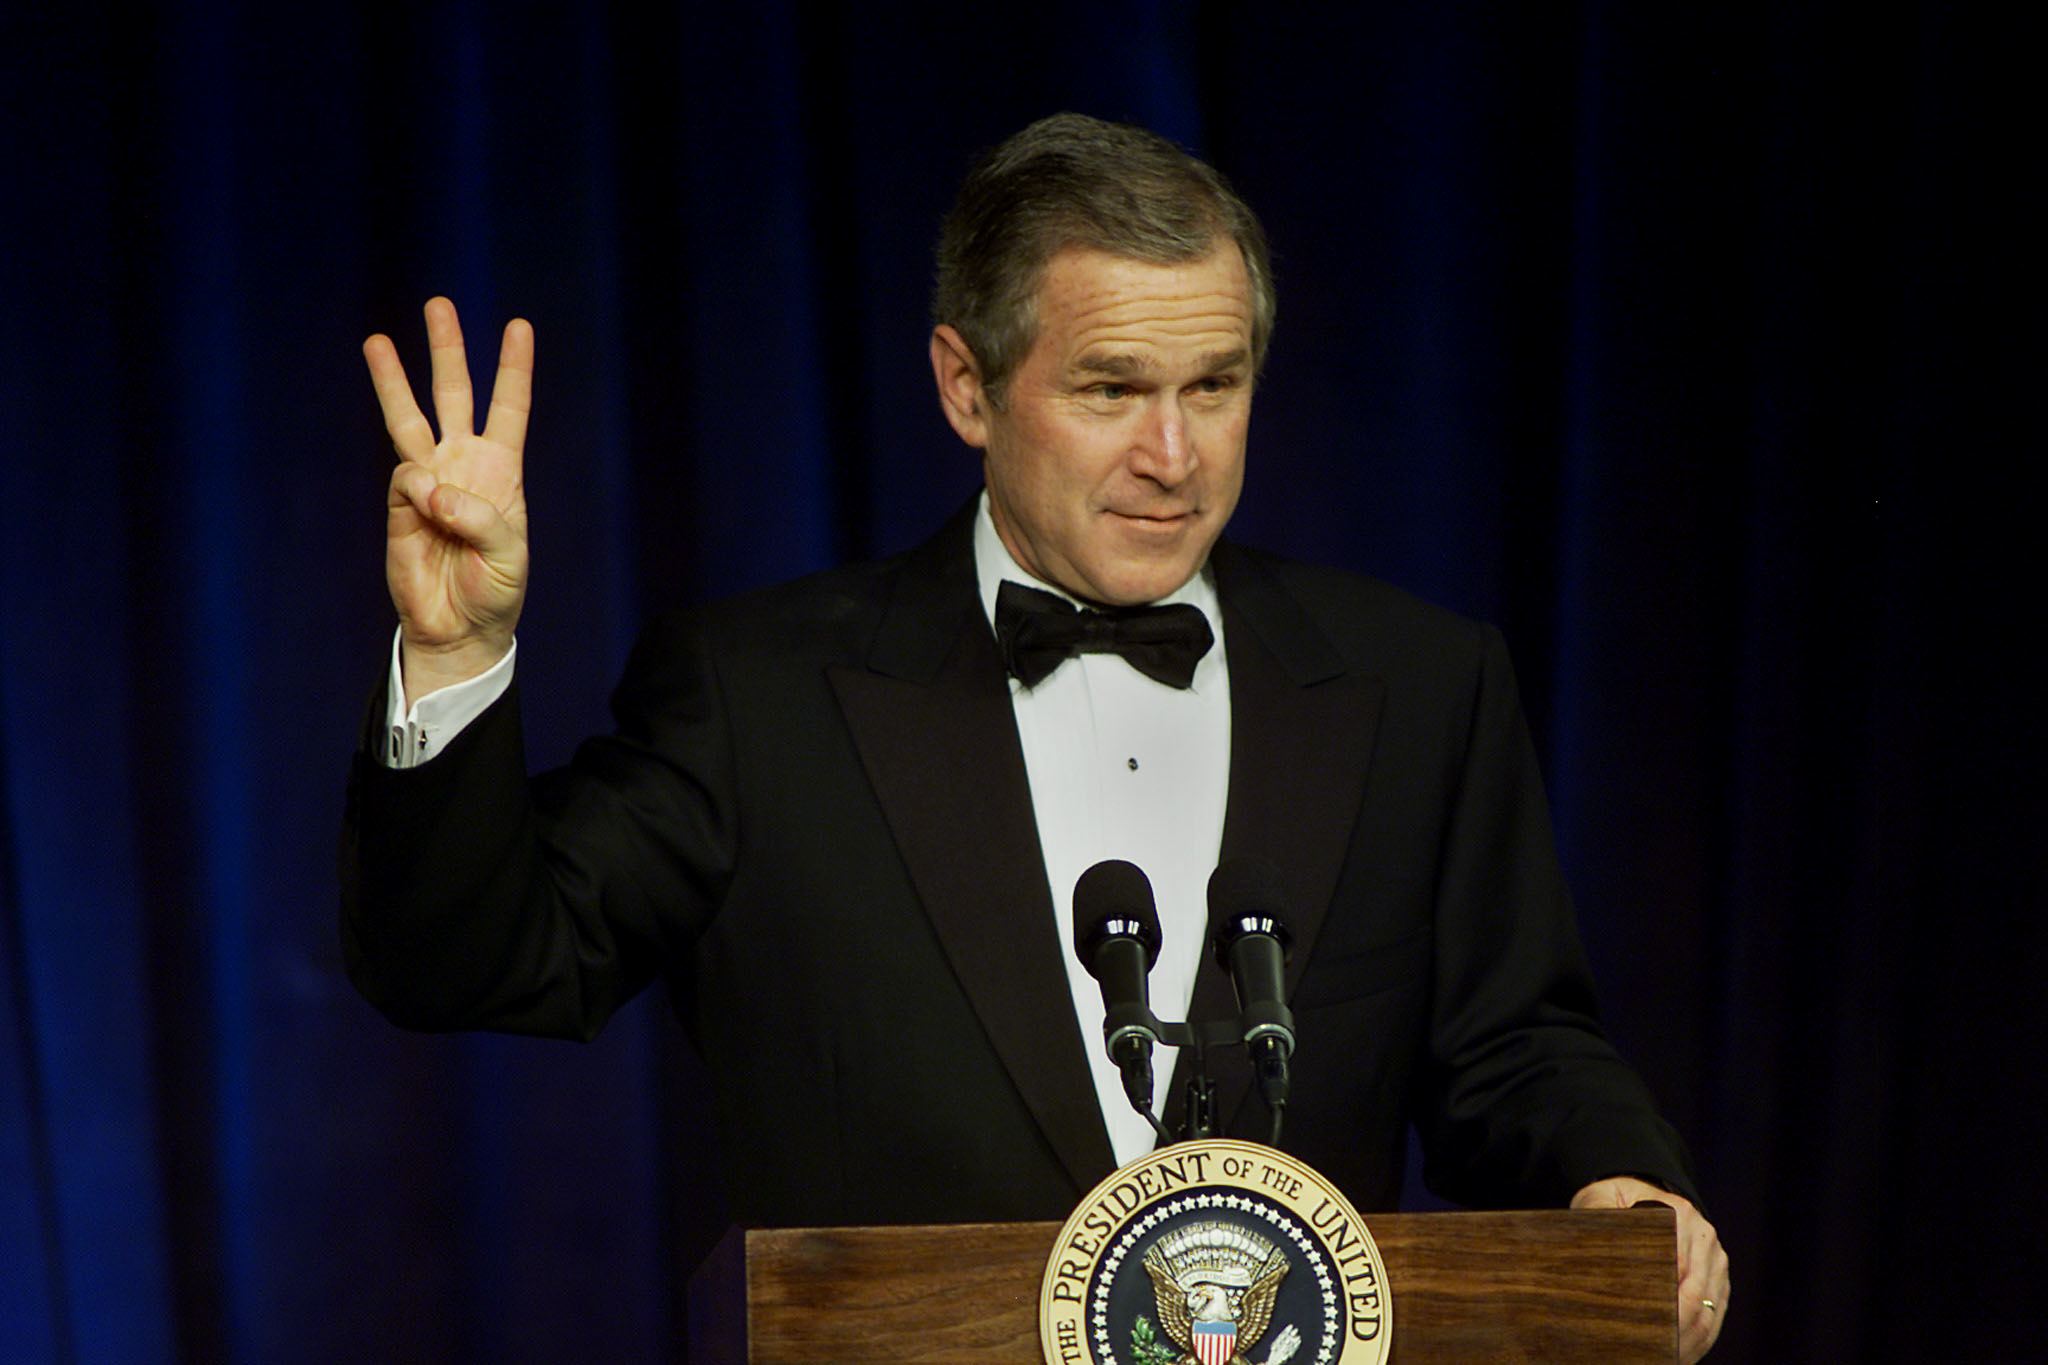 George W. Bush flashes a "W" at one of the nine balls he attended during his inauguration.